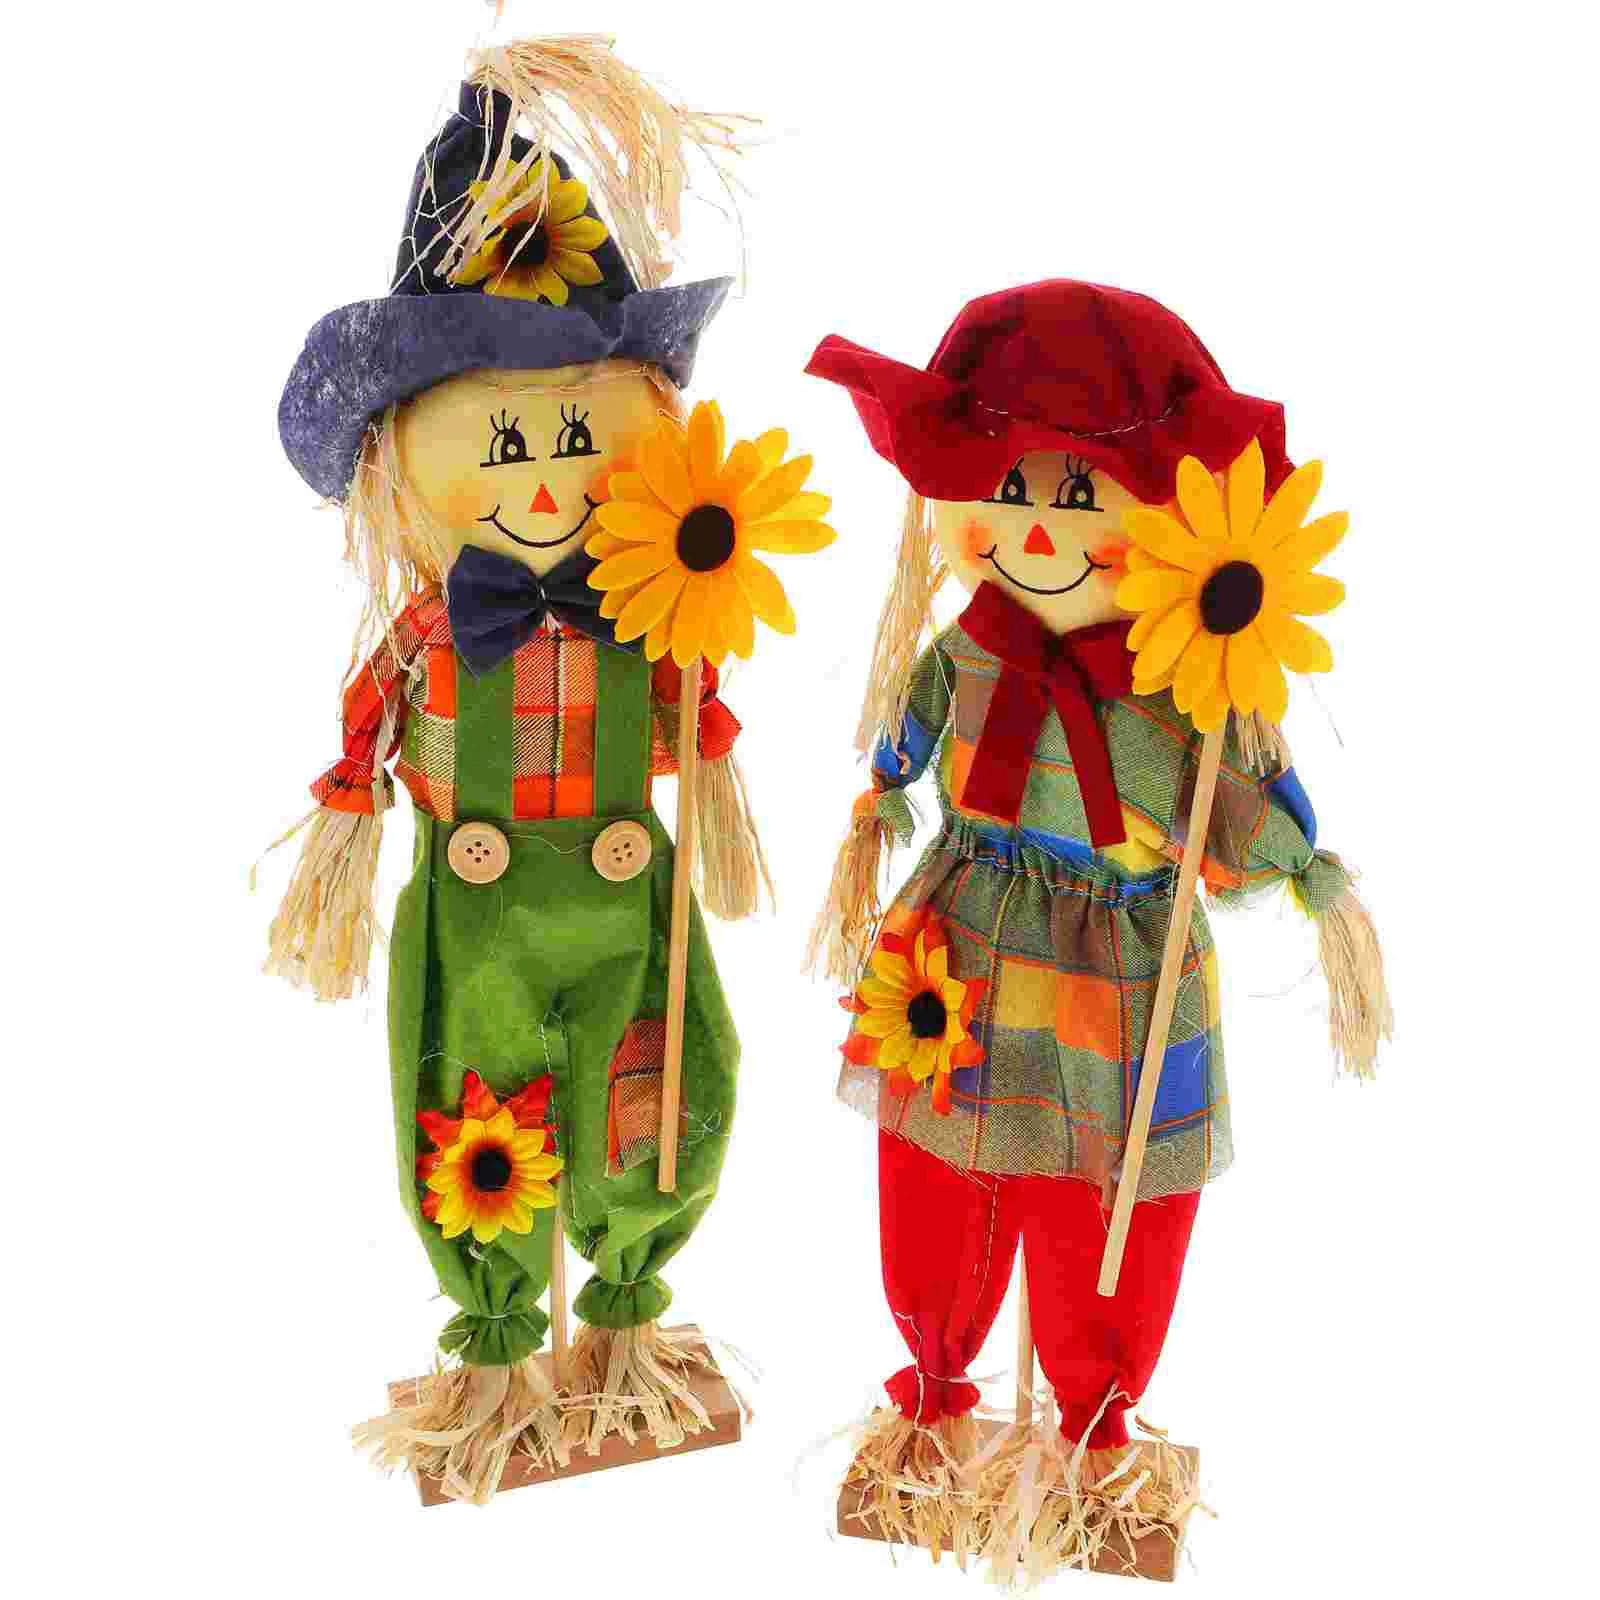 

Halloween Scarecrow Ornaments Adorable Scarecrow Decors for Garden Party Decoration Yard Lawn Signs Scene Layout Ornament